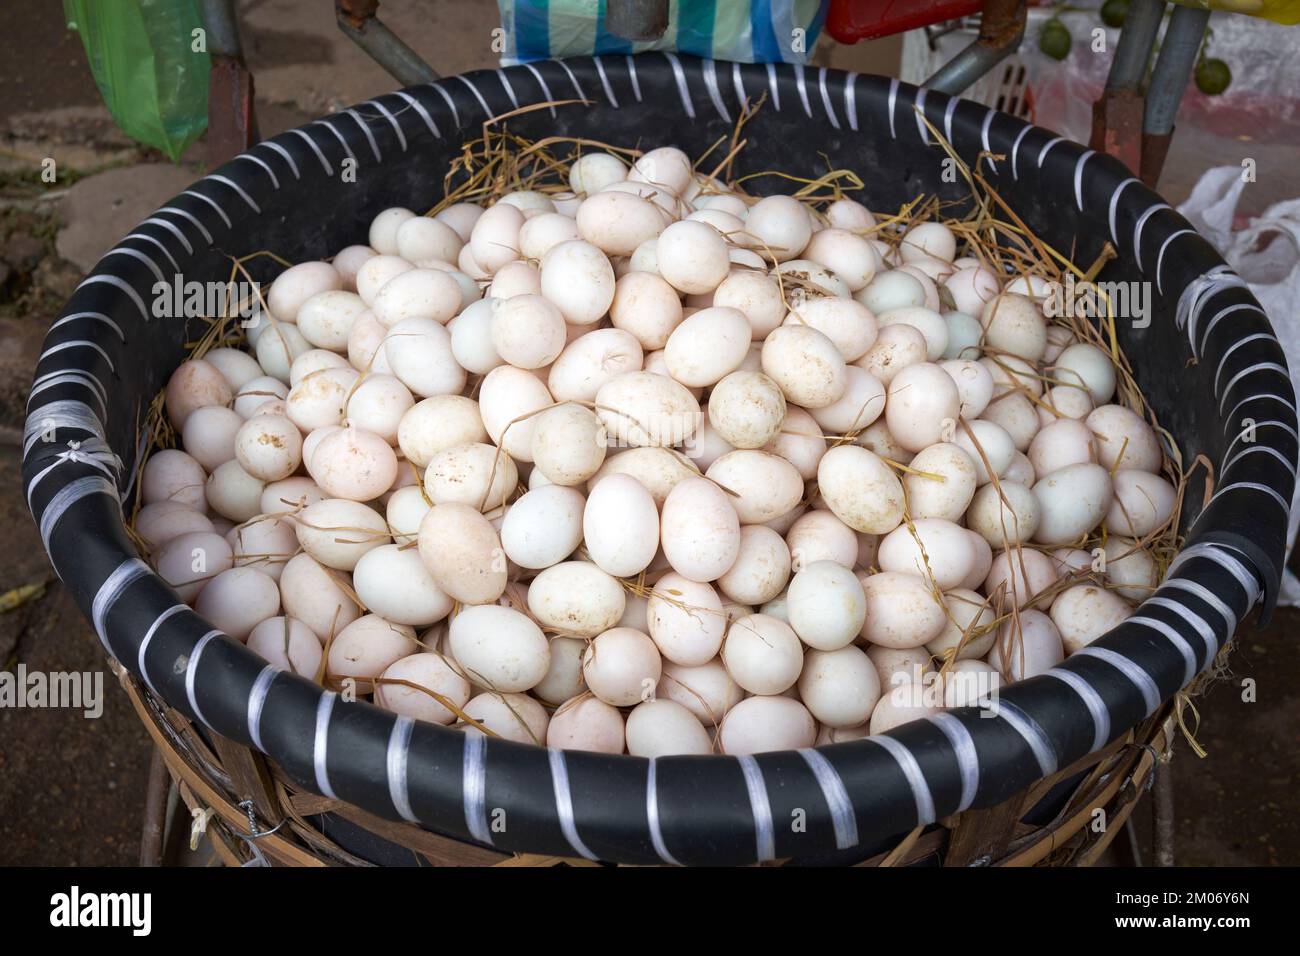 Eggs on sale at the morning market in Hoi An Vietnam Stock Photo